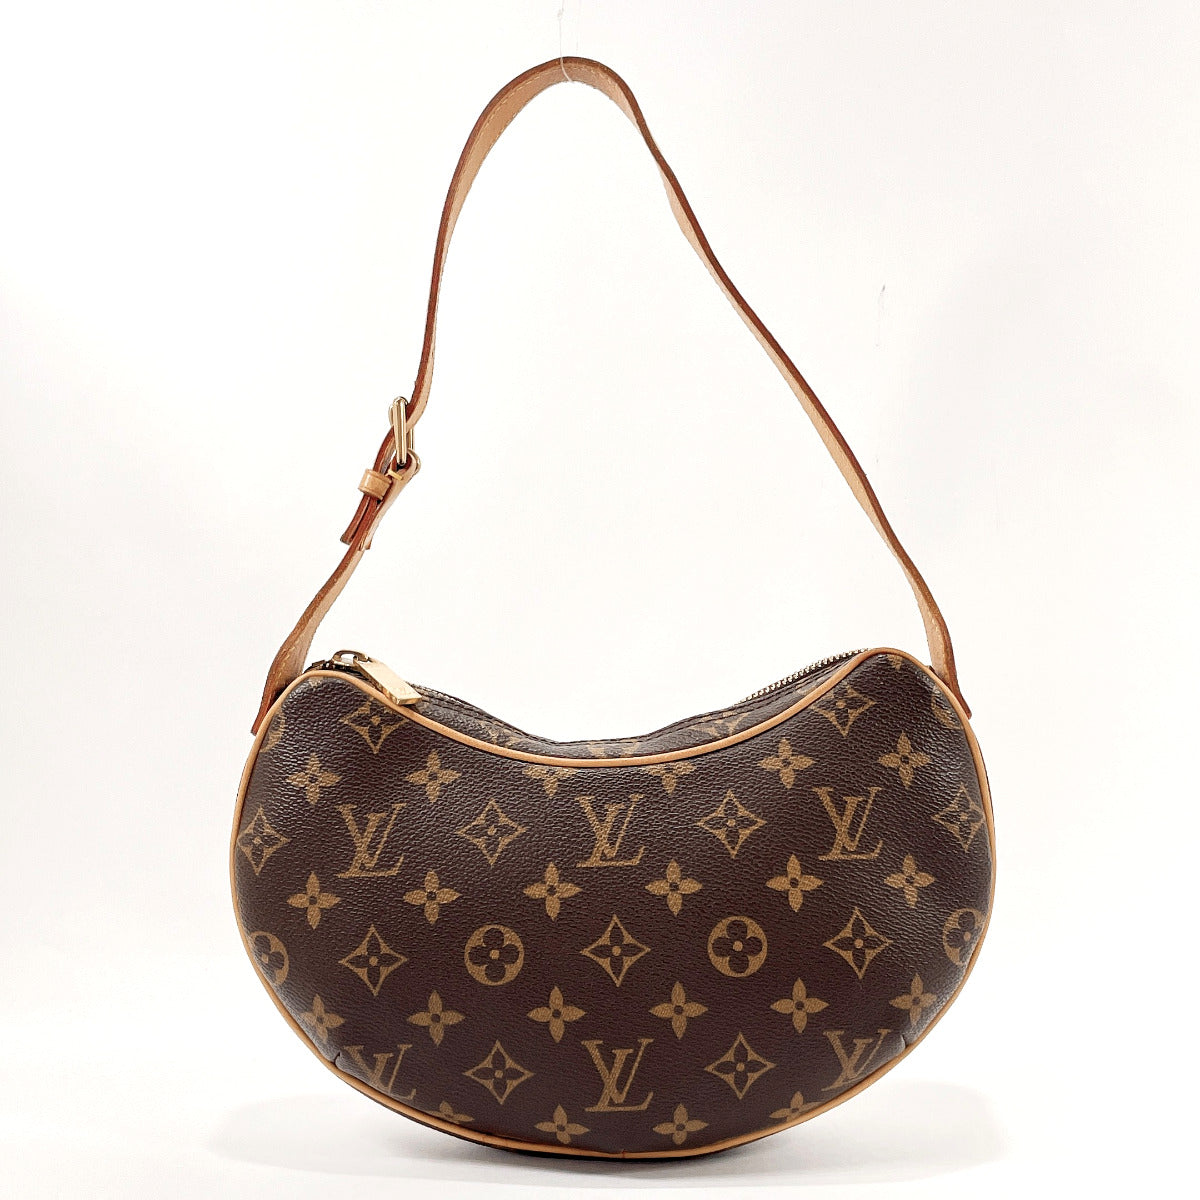 Shop Louis Vuitton Unisex Soft Type Luggage & Travel Bags by